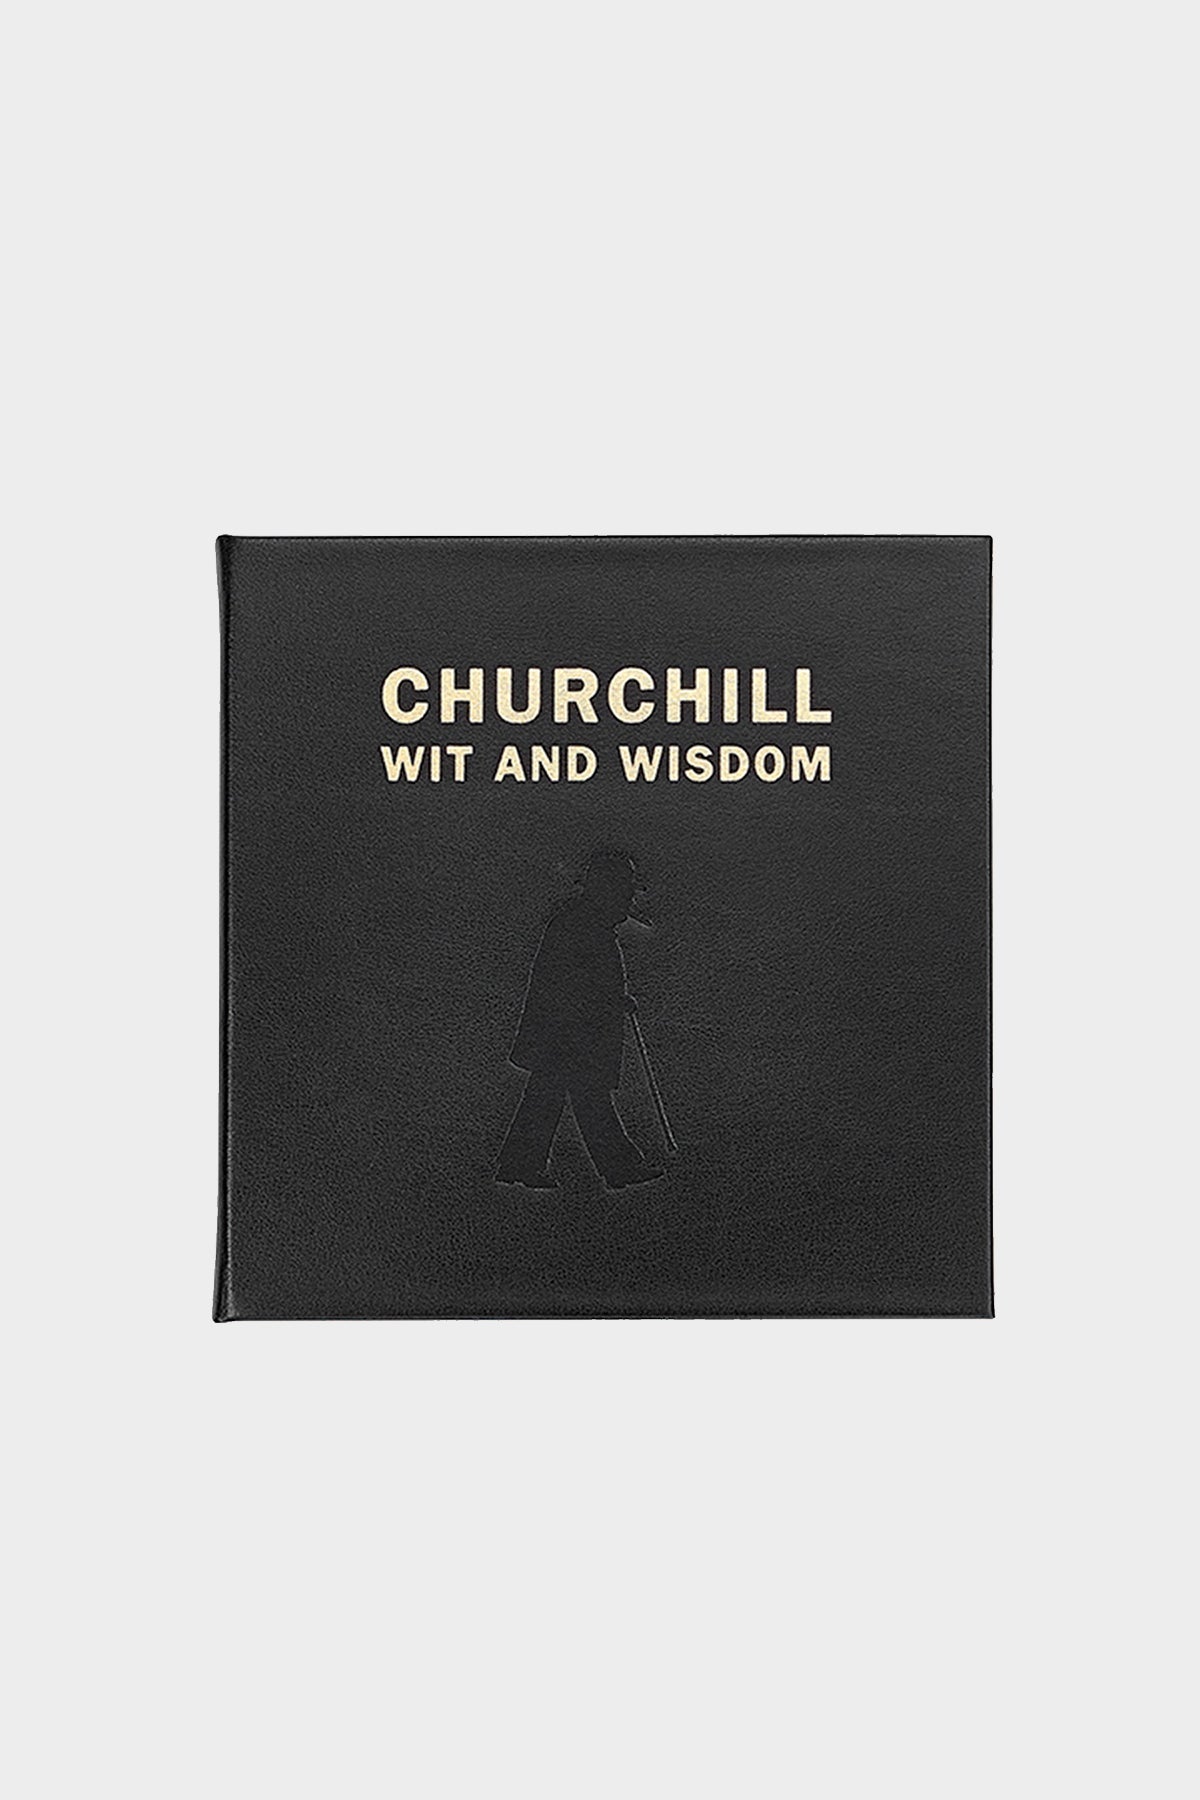 Churchill Wit And Wisdom in Black Bonded Leather - shop-olivia.com